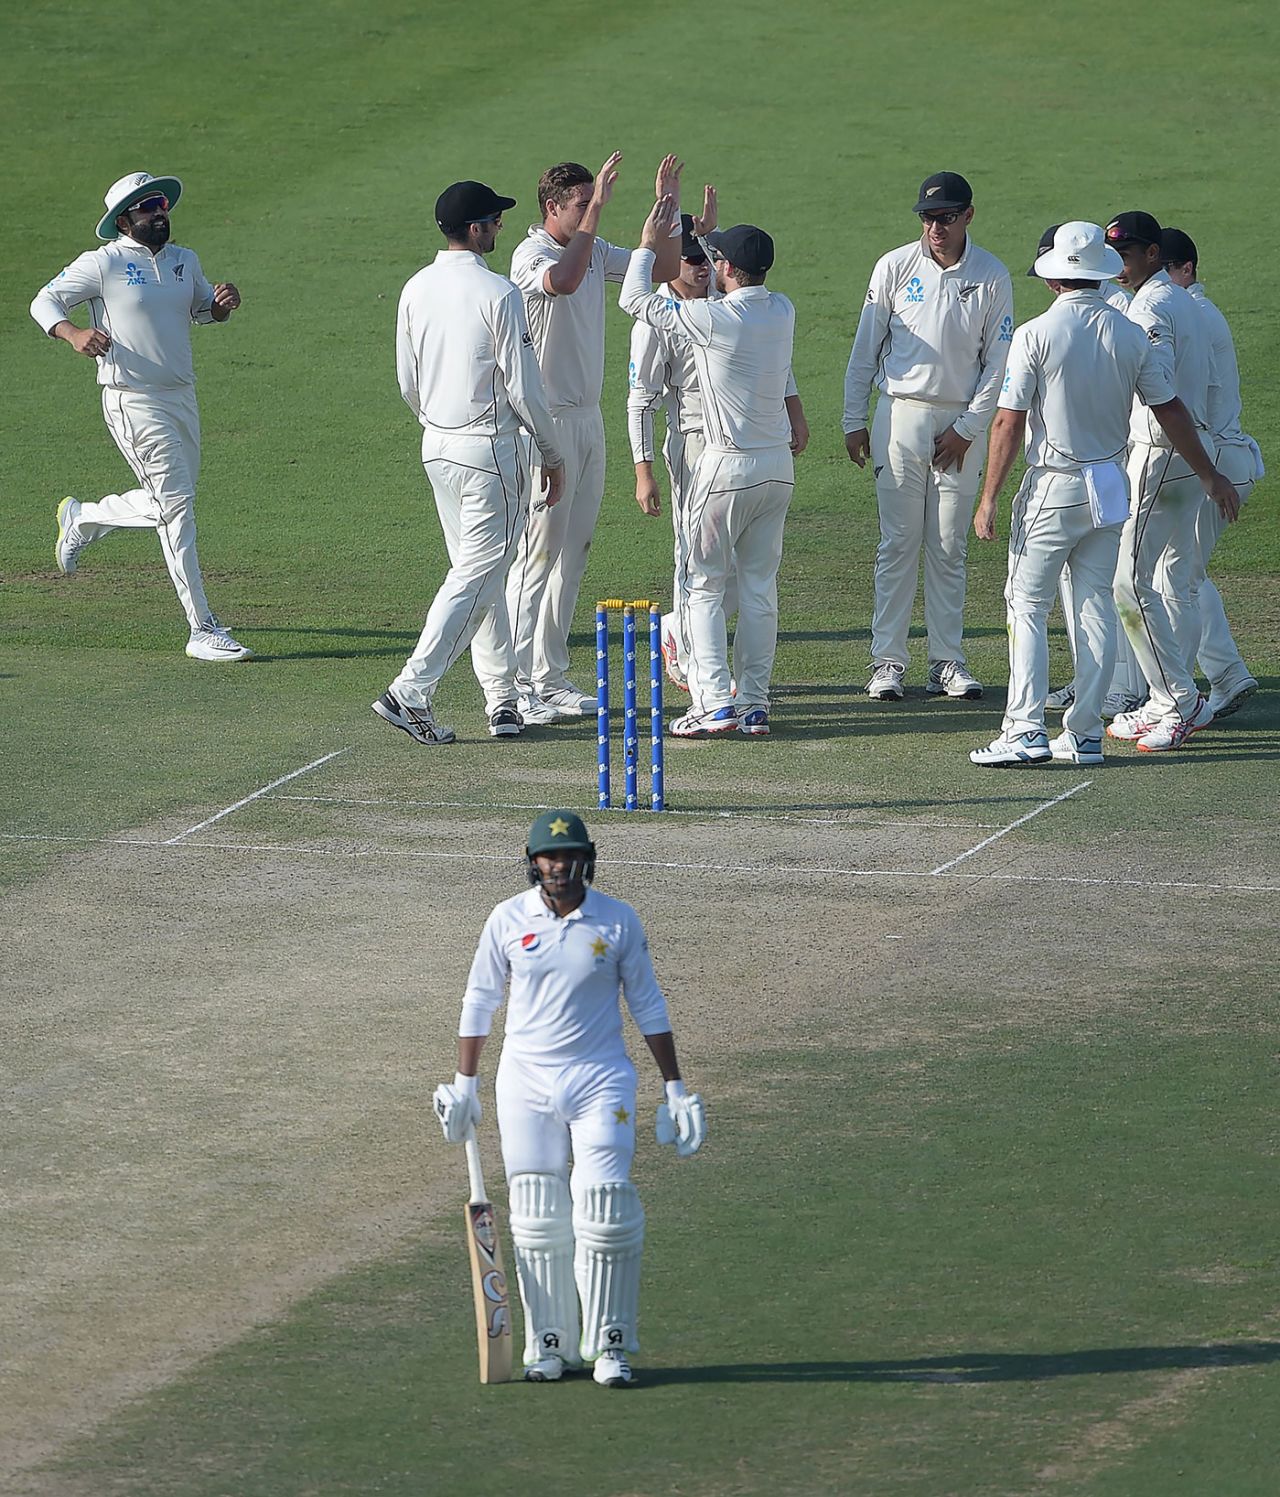 Haris Sohail was caught behind off Tim Southee, Pakistan v New Zealand, 3rd Test, Abu Dhabi, 2nd day, December 4, 2018